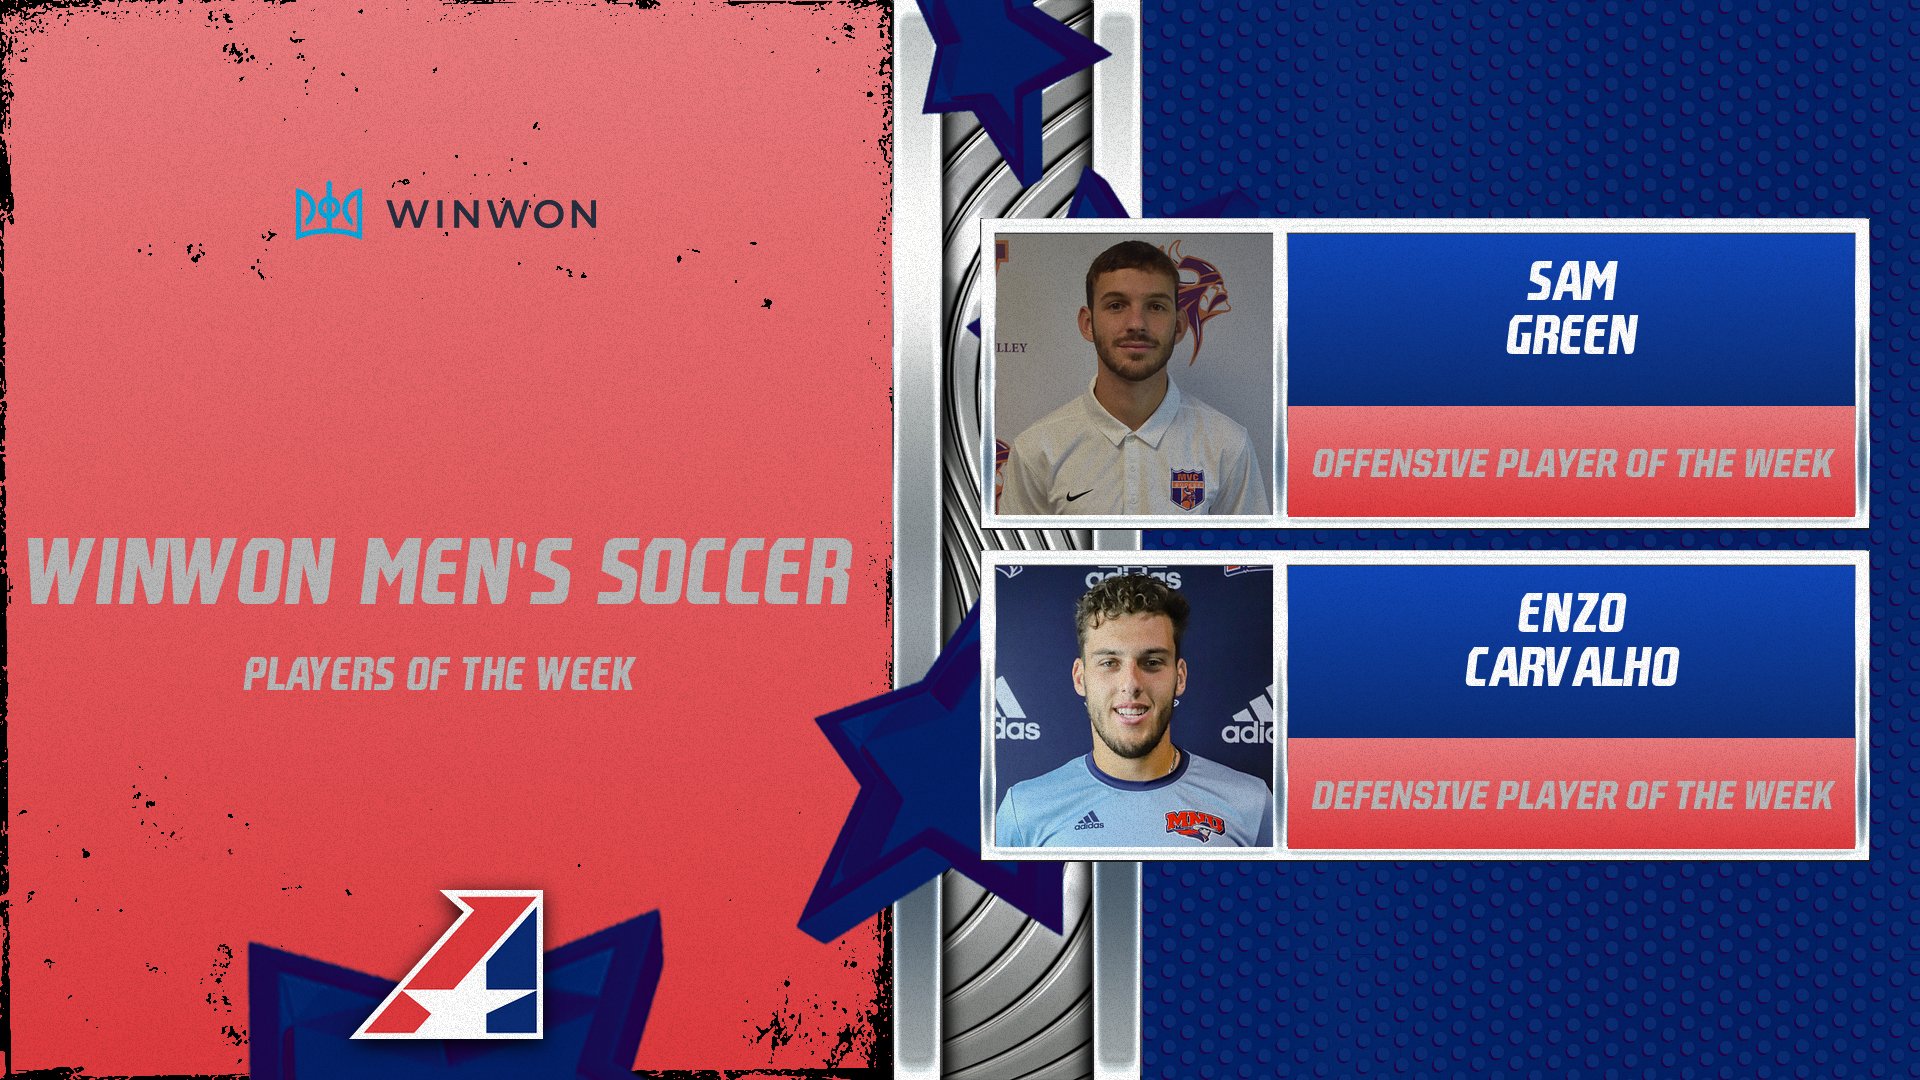 Green, Carvalho Earn Final WinWon Men’s Soccer Player of the Week Awards of 2023